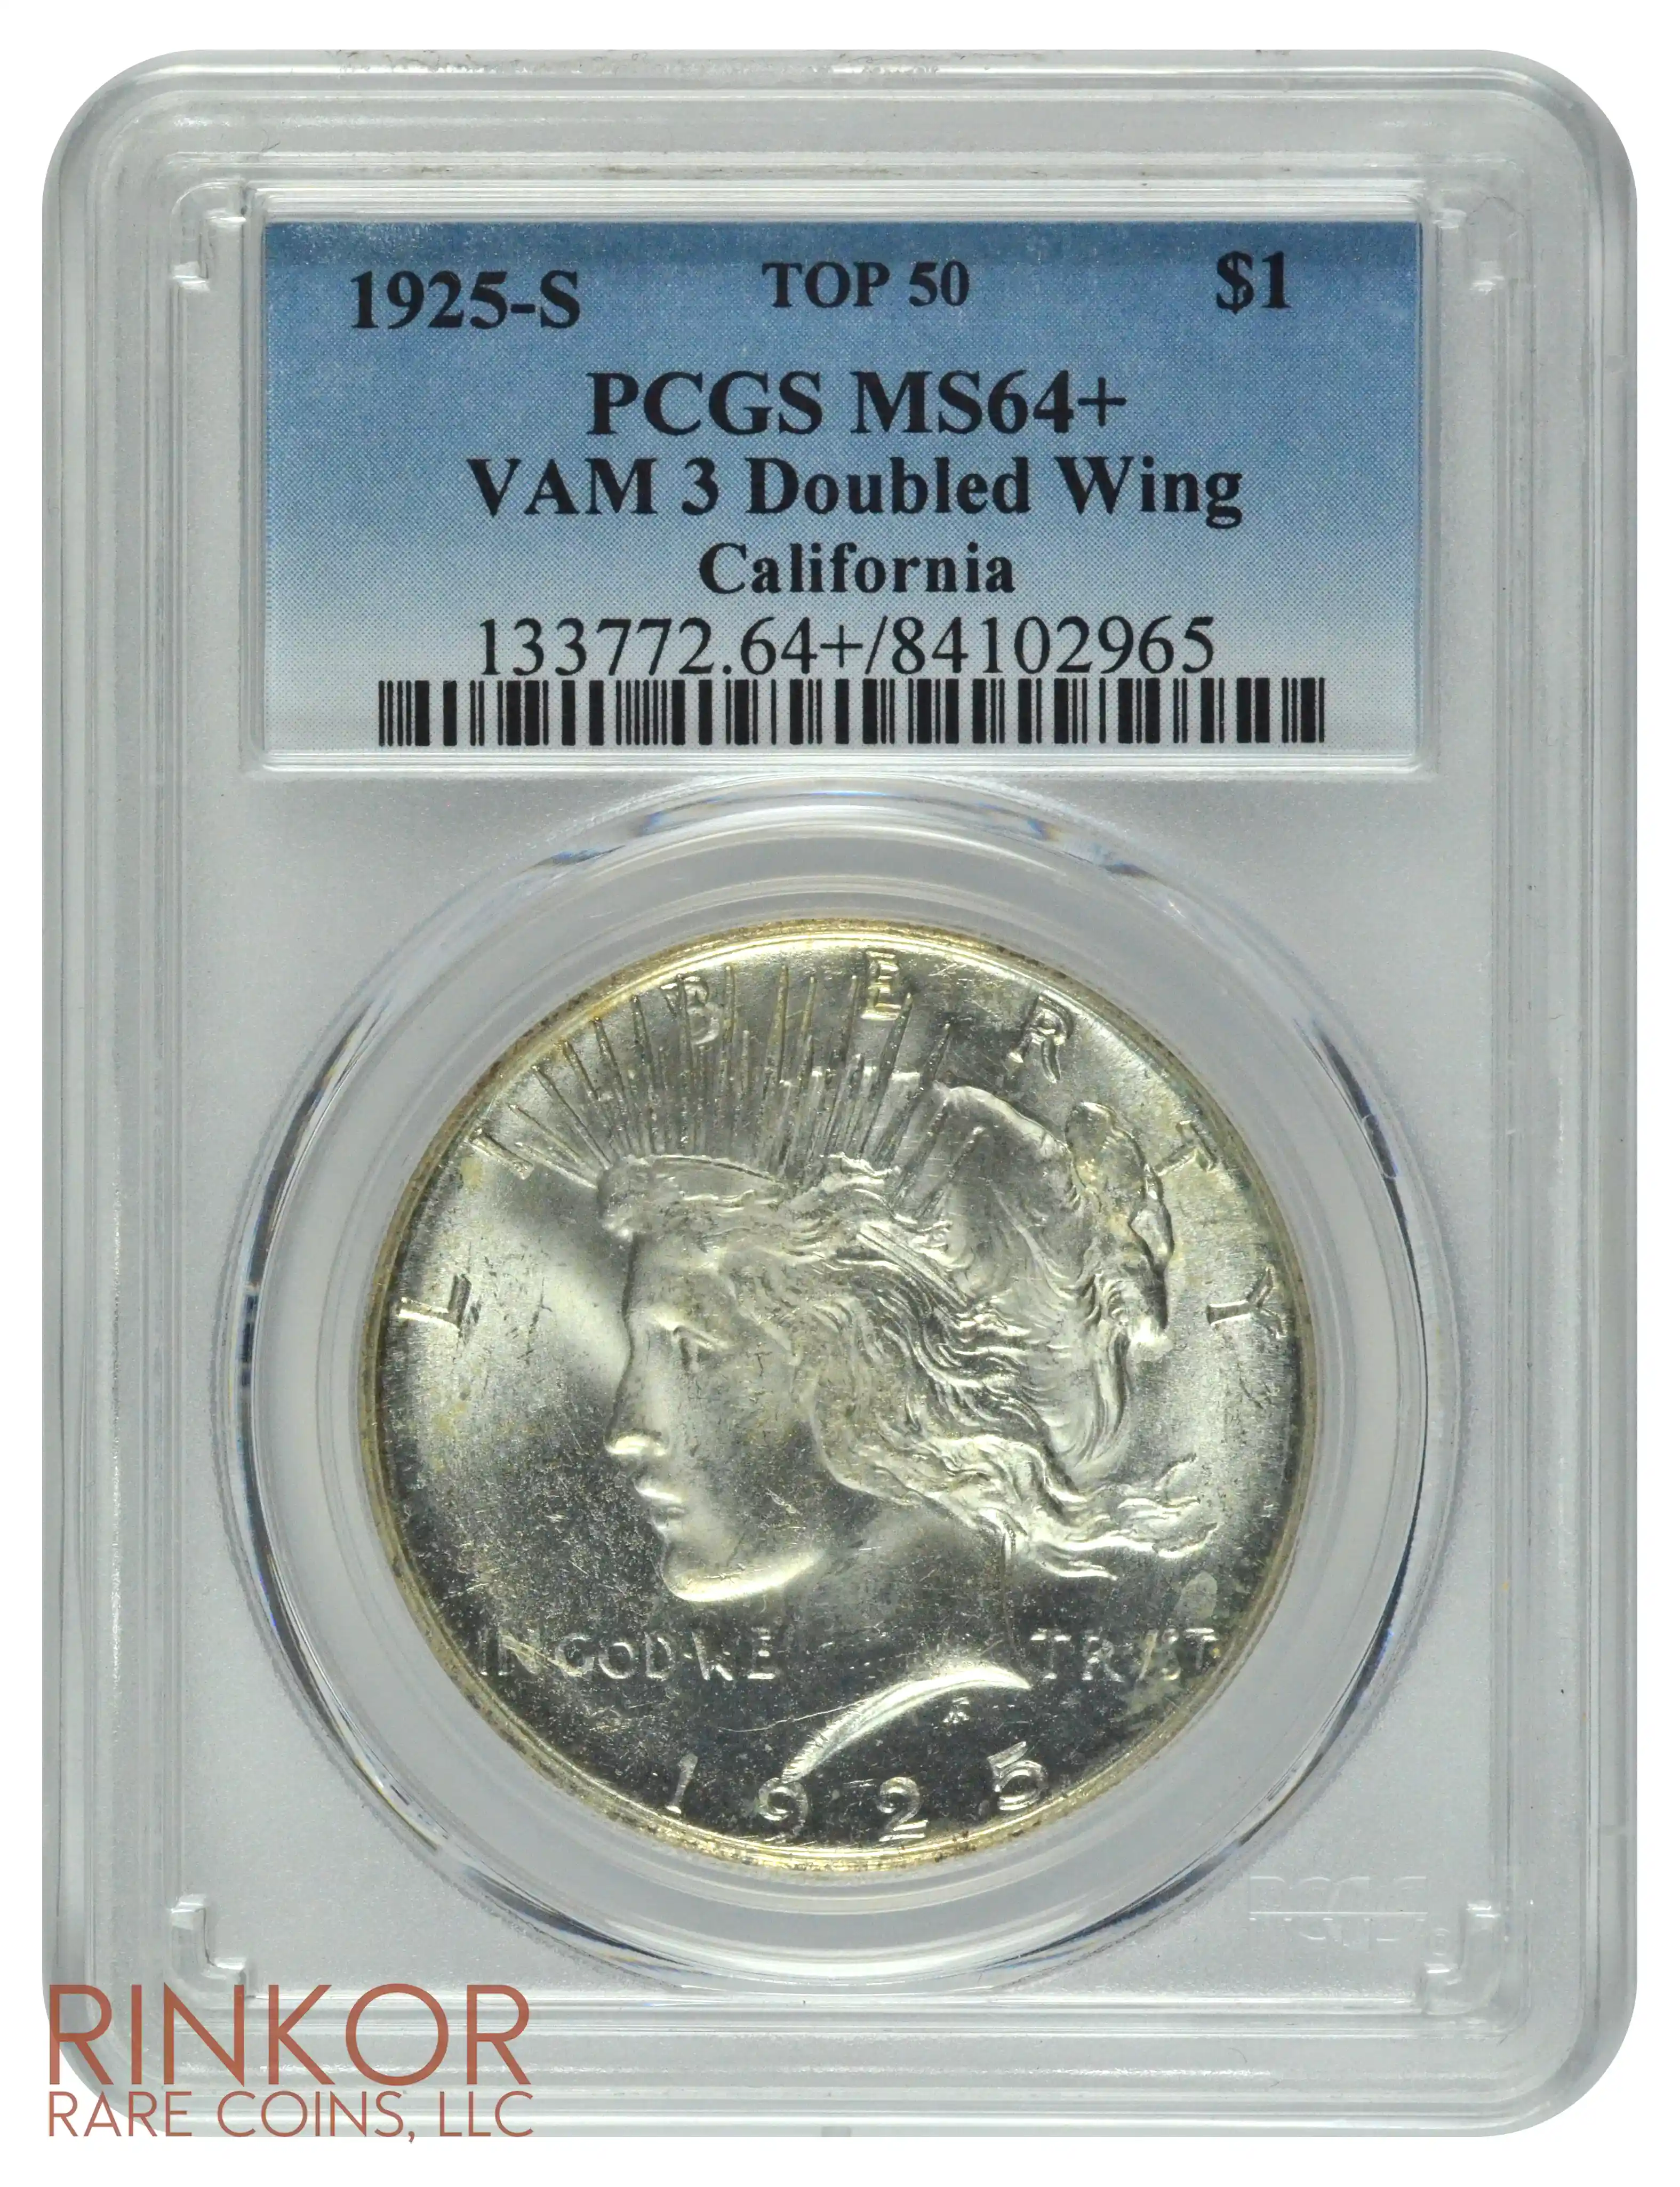 1925-S $1 VAM 3 Doubled Wing PCGS MS 64+